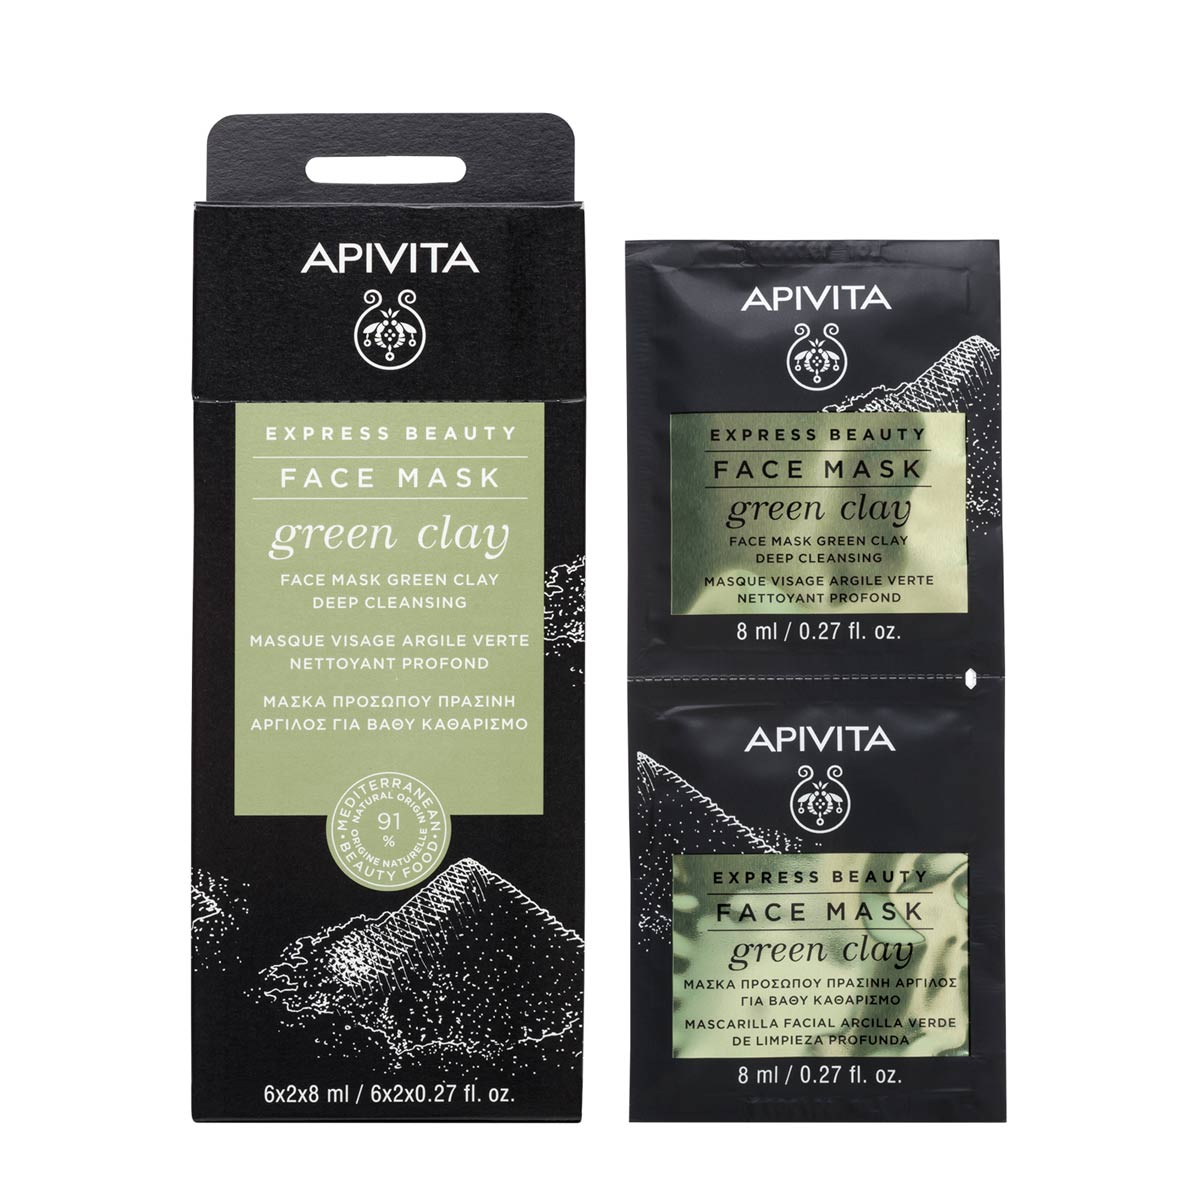 APIVITA BOX OF EXPRESS BEAUTY Deep Cleansing Face Mask with Green Clay 6 x 2 x 8ml